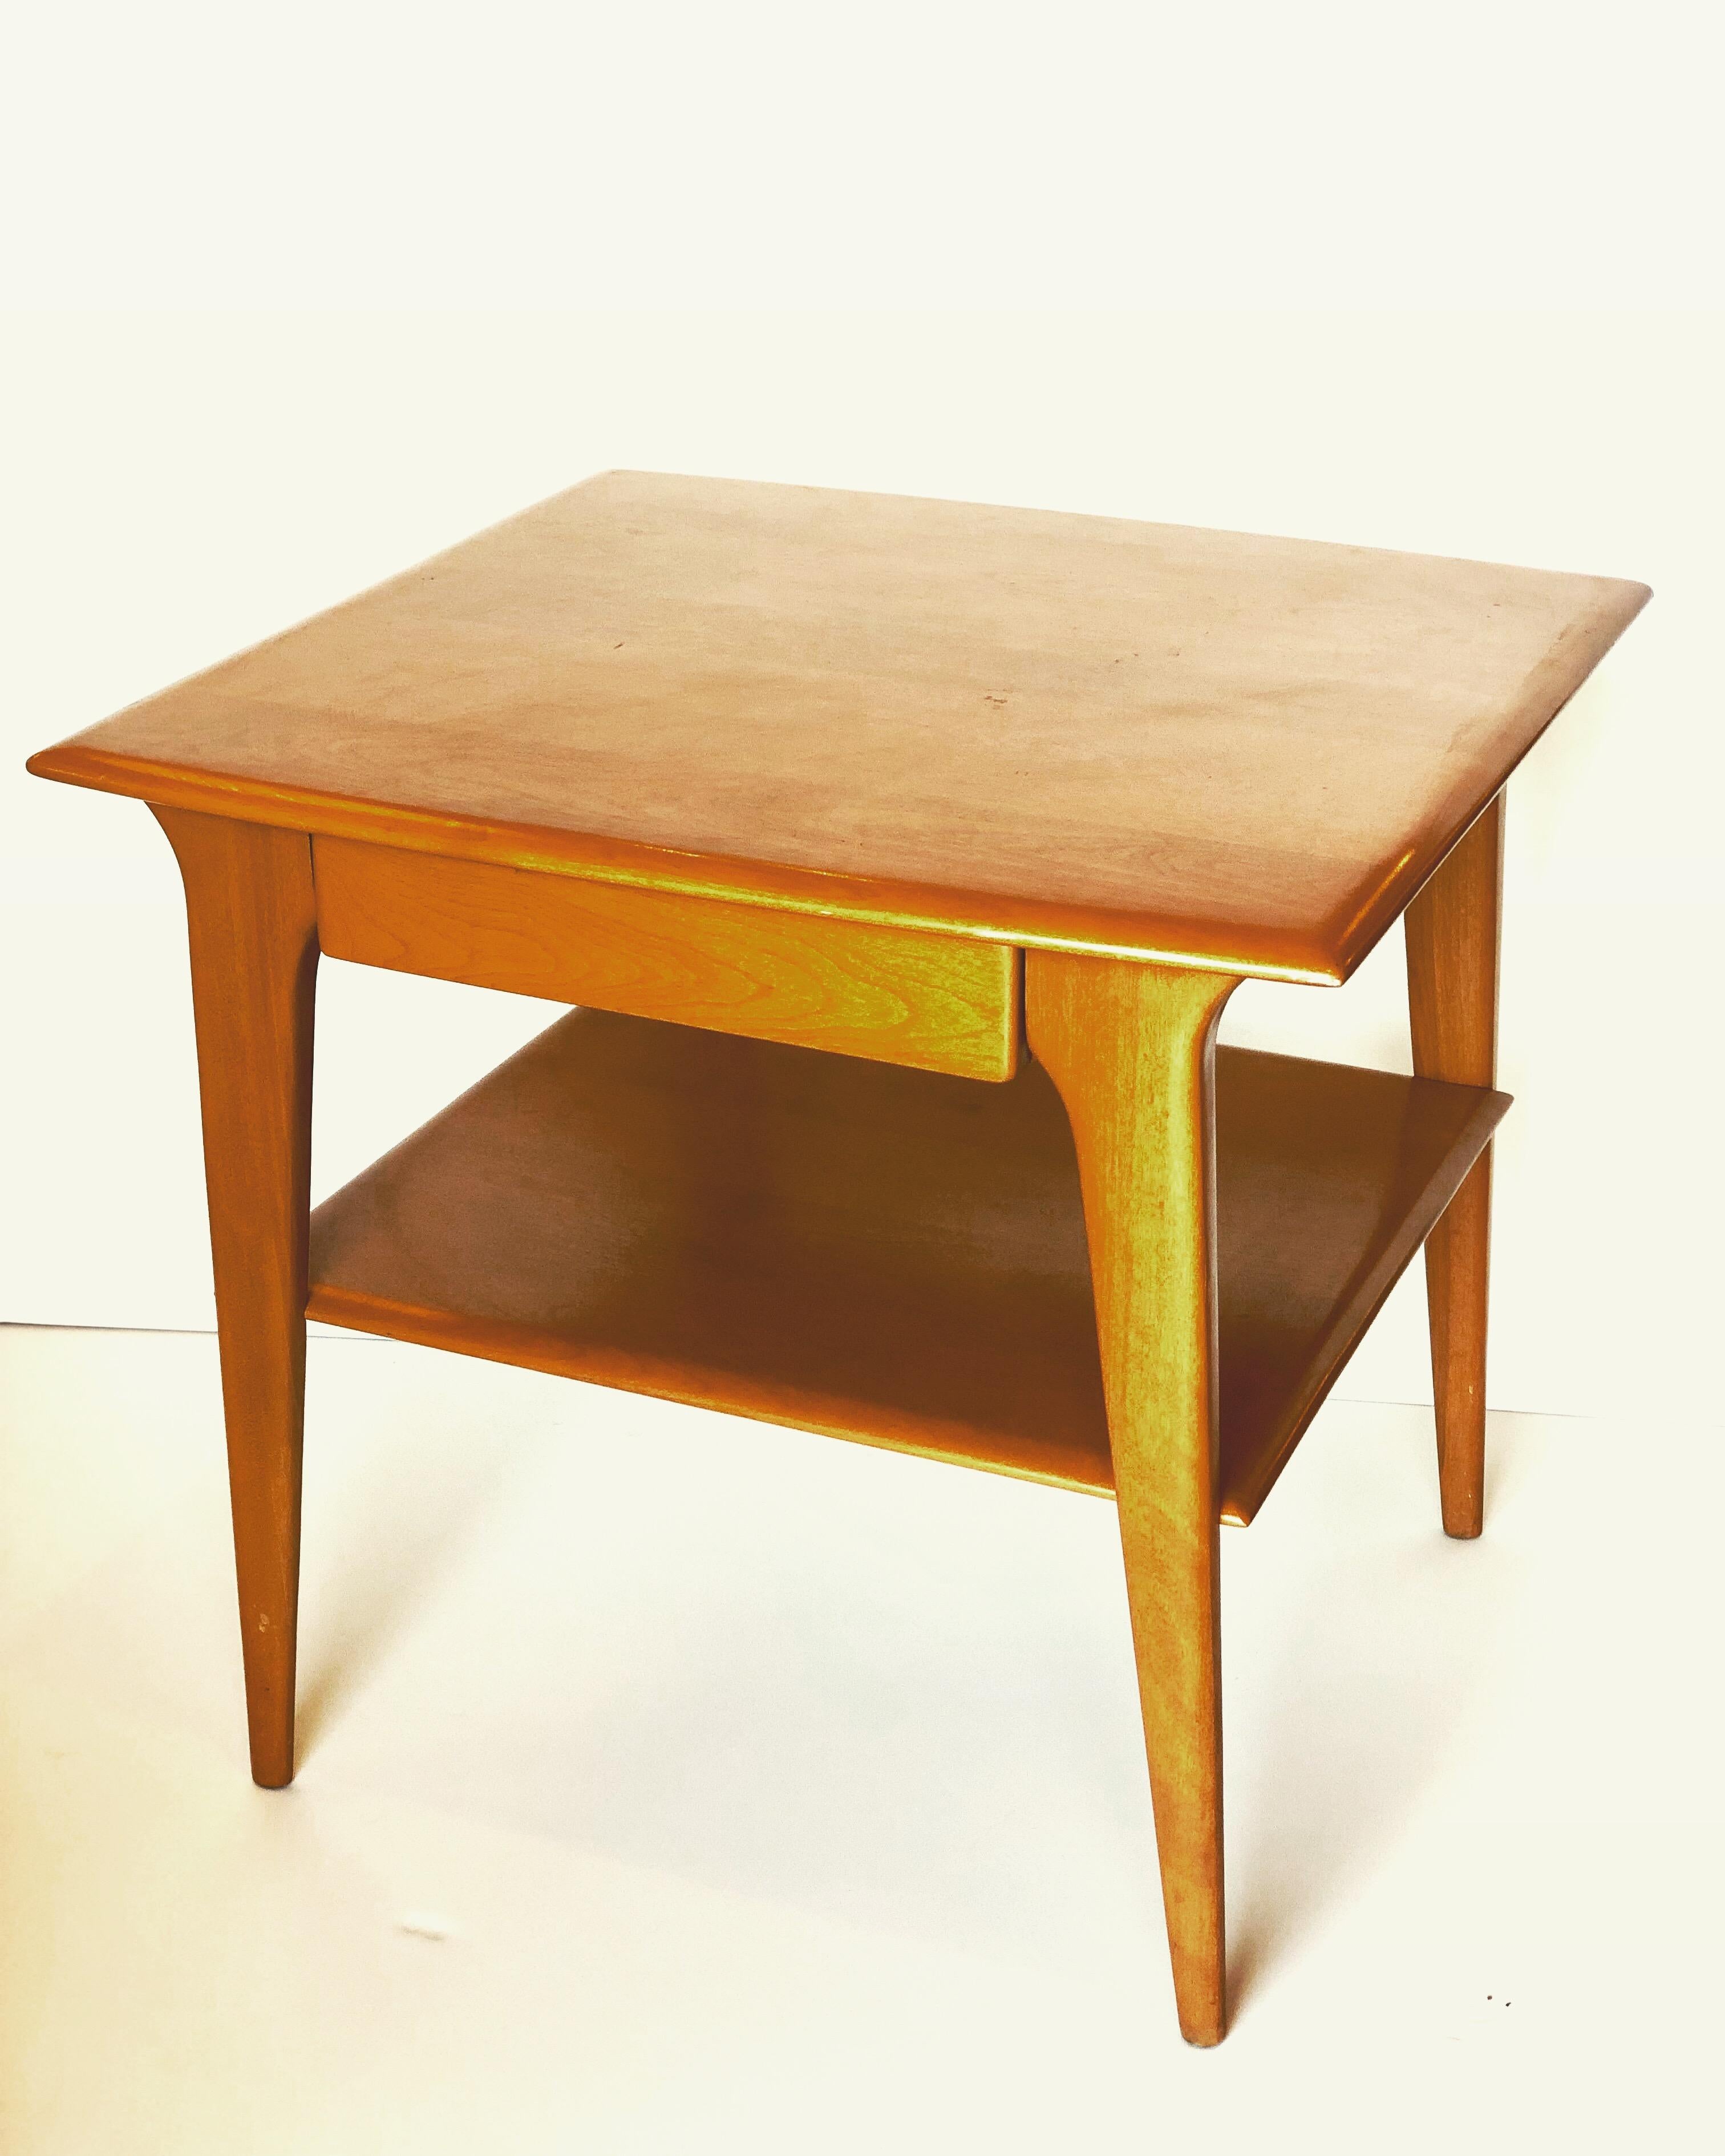 Beautiful tall table by Heywood Wakefield, circa 1950s freshly refinished in a honey color solid and sturdy elegant legs represents the Atomic age at full splendor.